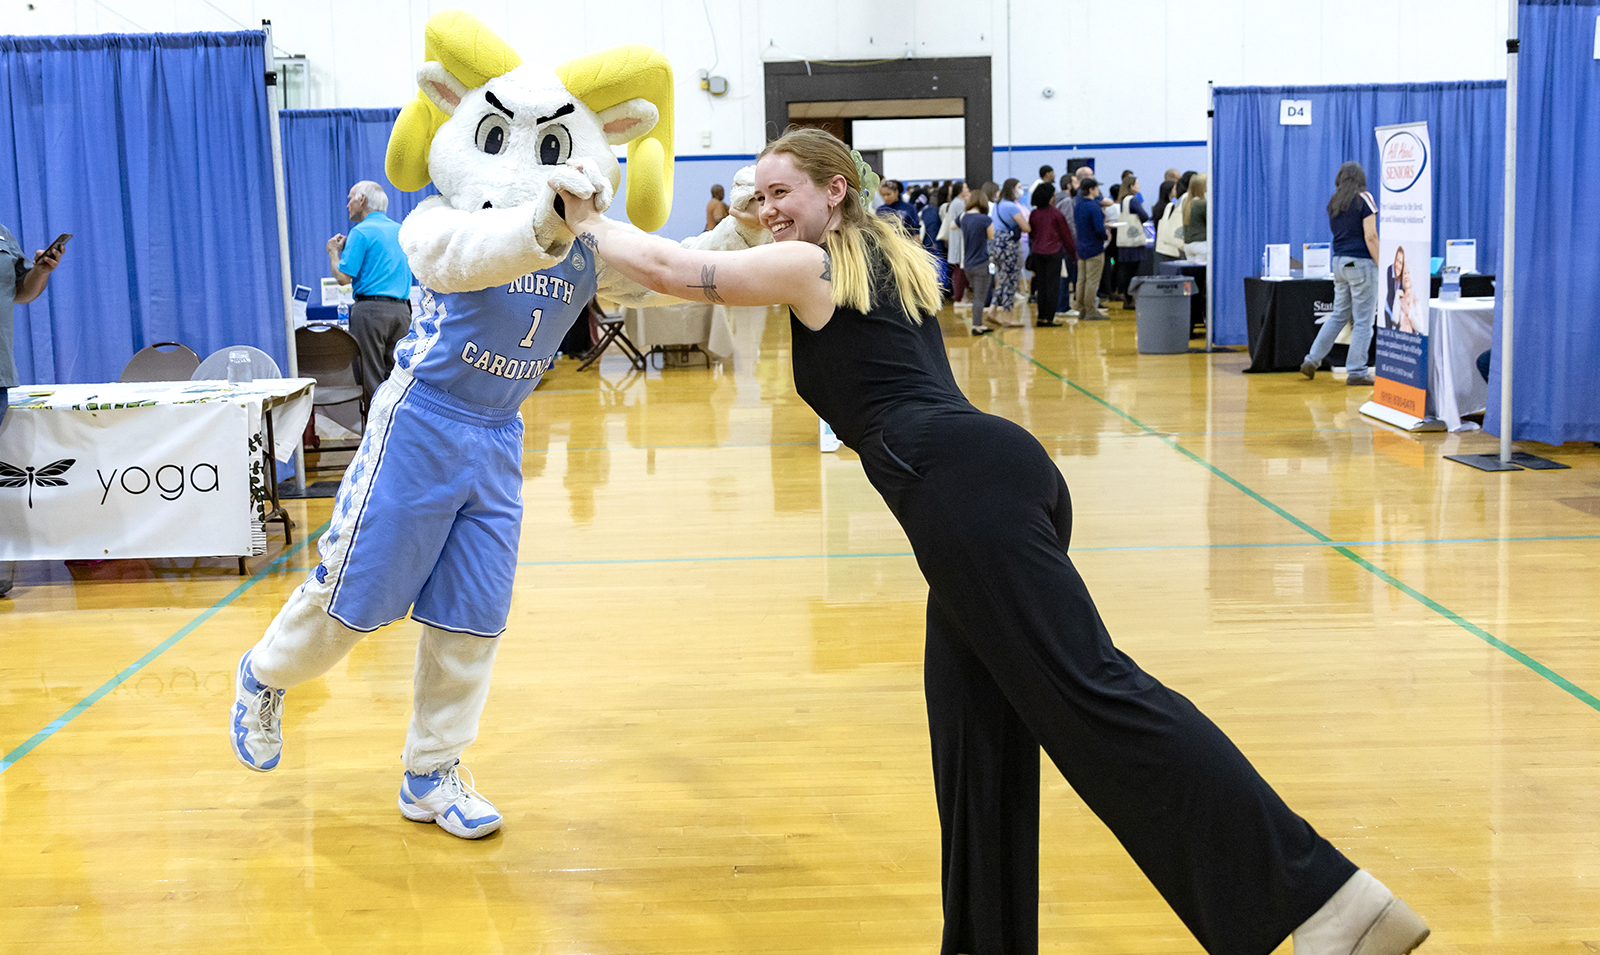 Woman dancing with Rameses the mascot